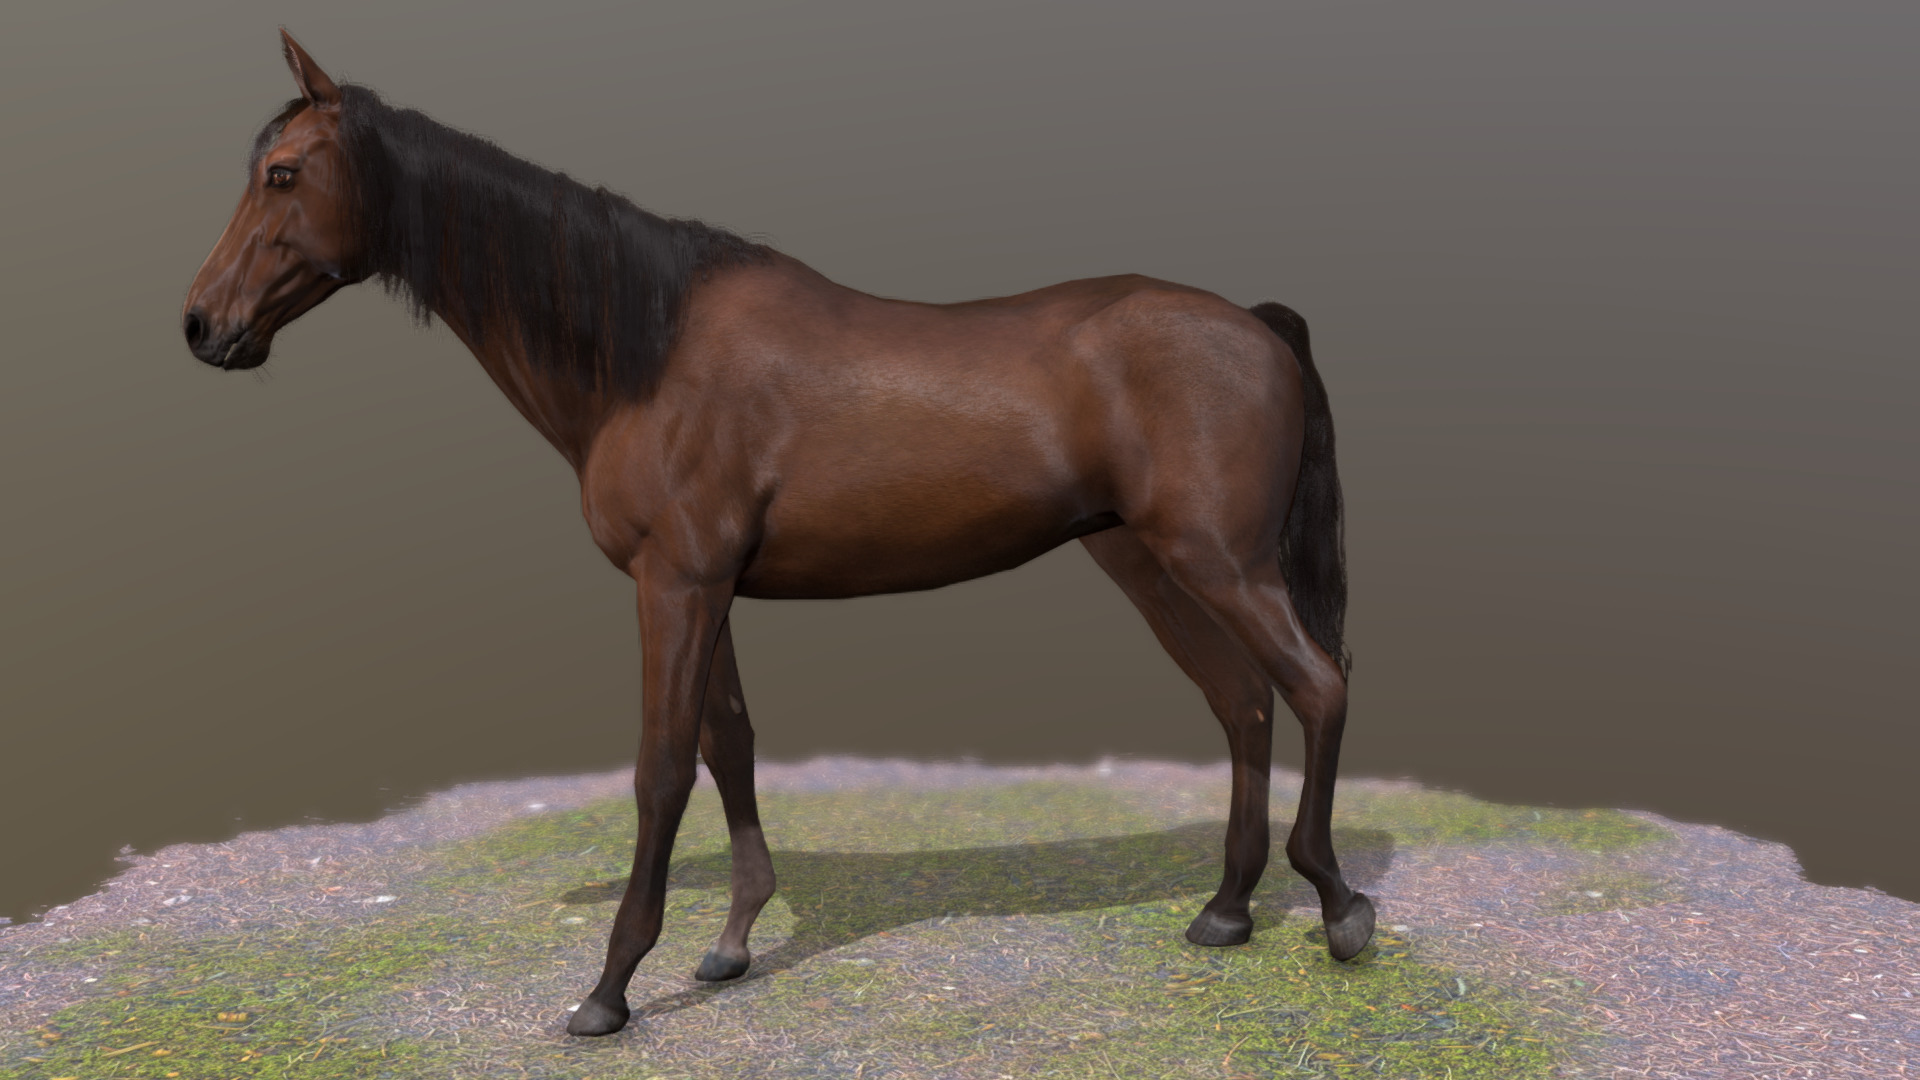 3D model Horse standing Pose 2 - This is a 3D model of the Horse standing Pose 2. The 3D model is about a brown horse standing on a green field.